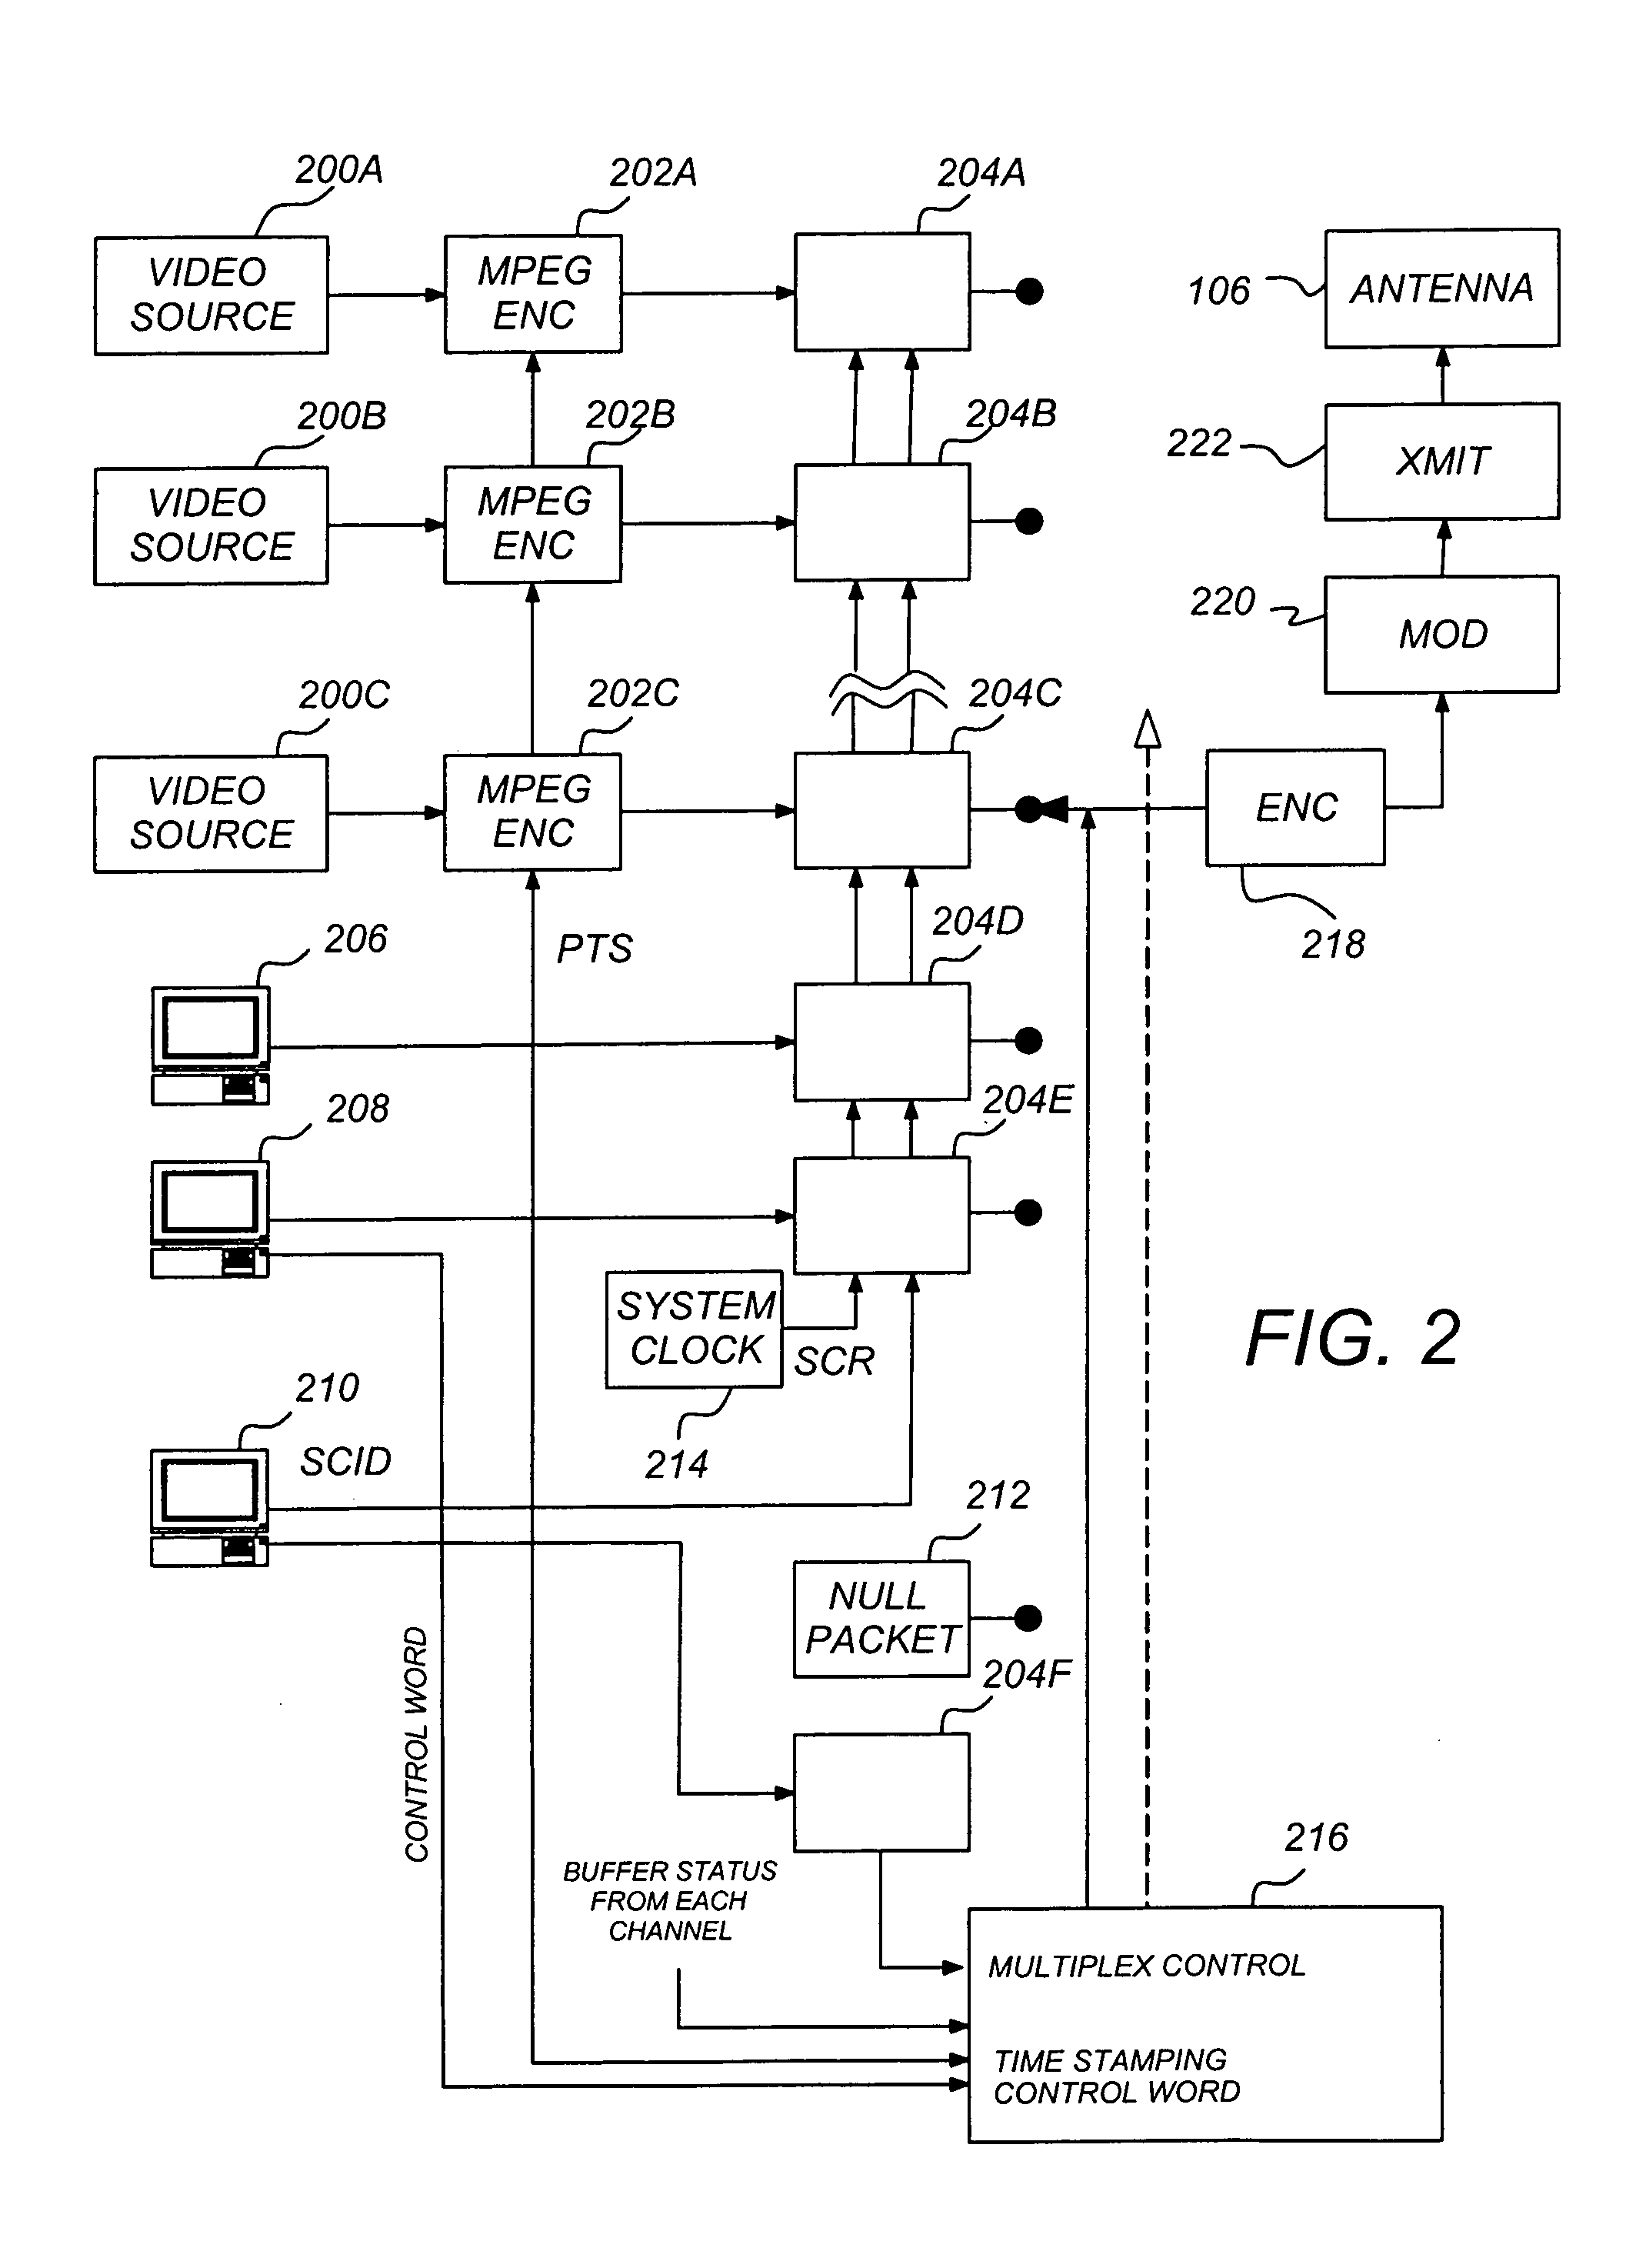 Super encrypted storage and retrieval of media programs in a hard-paired receiver and storage device